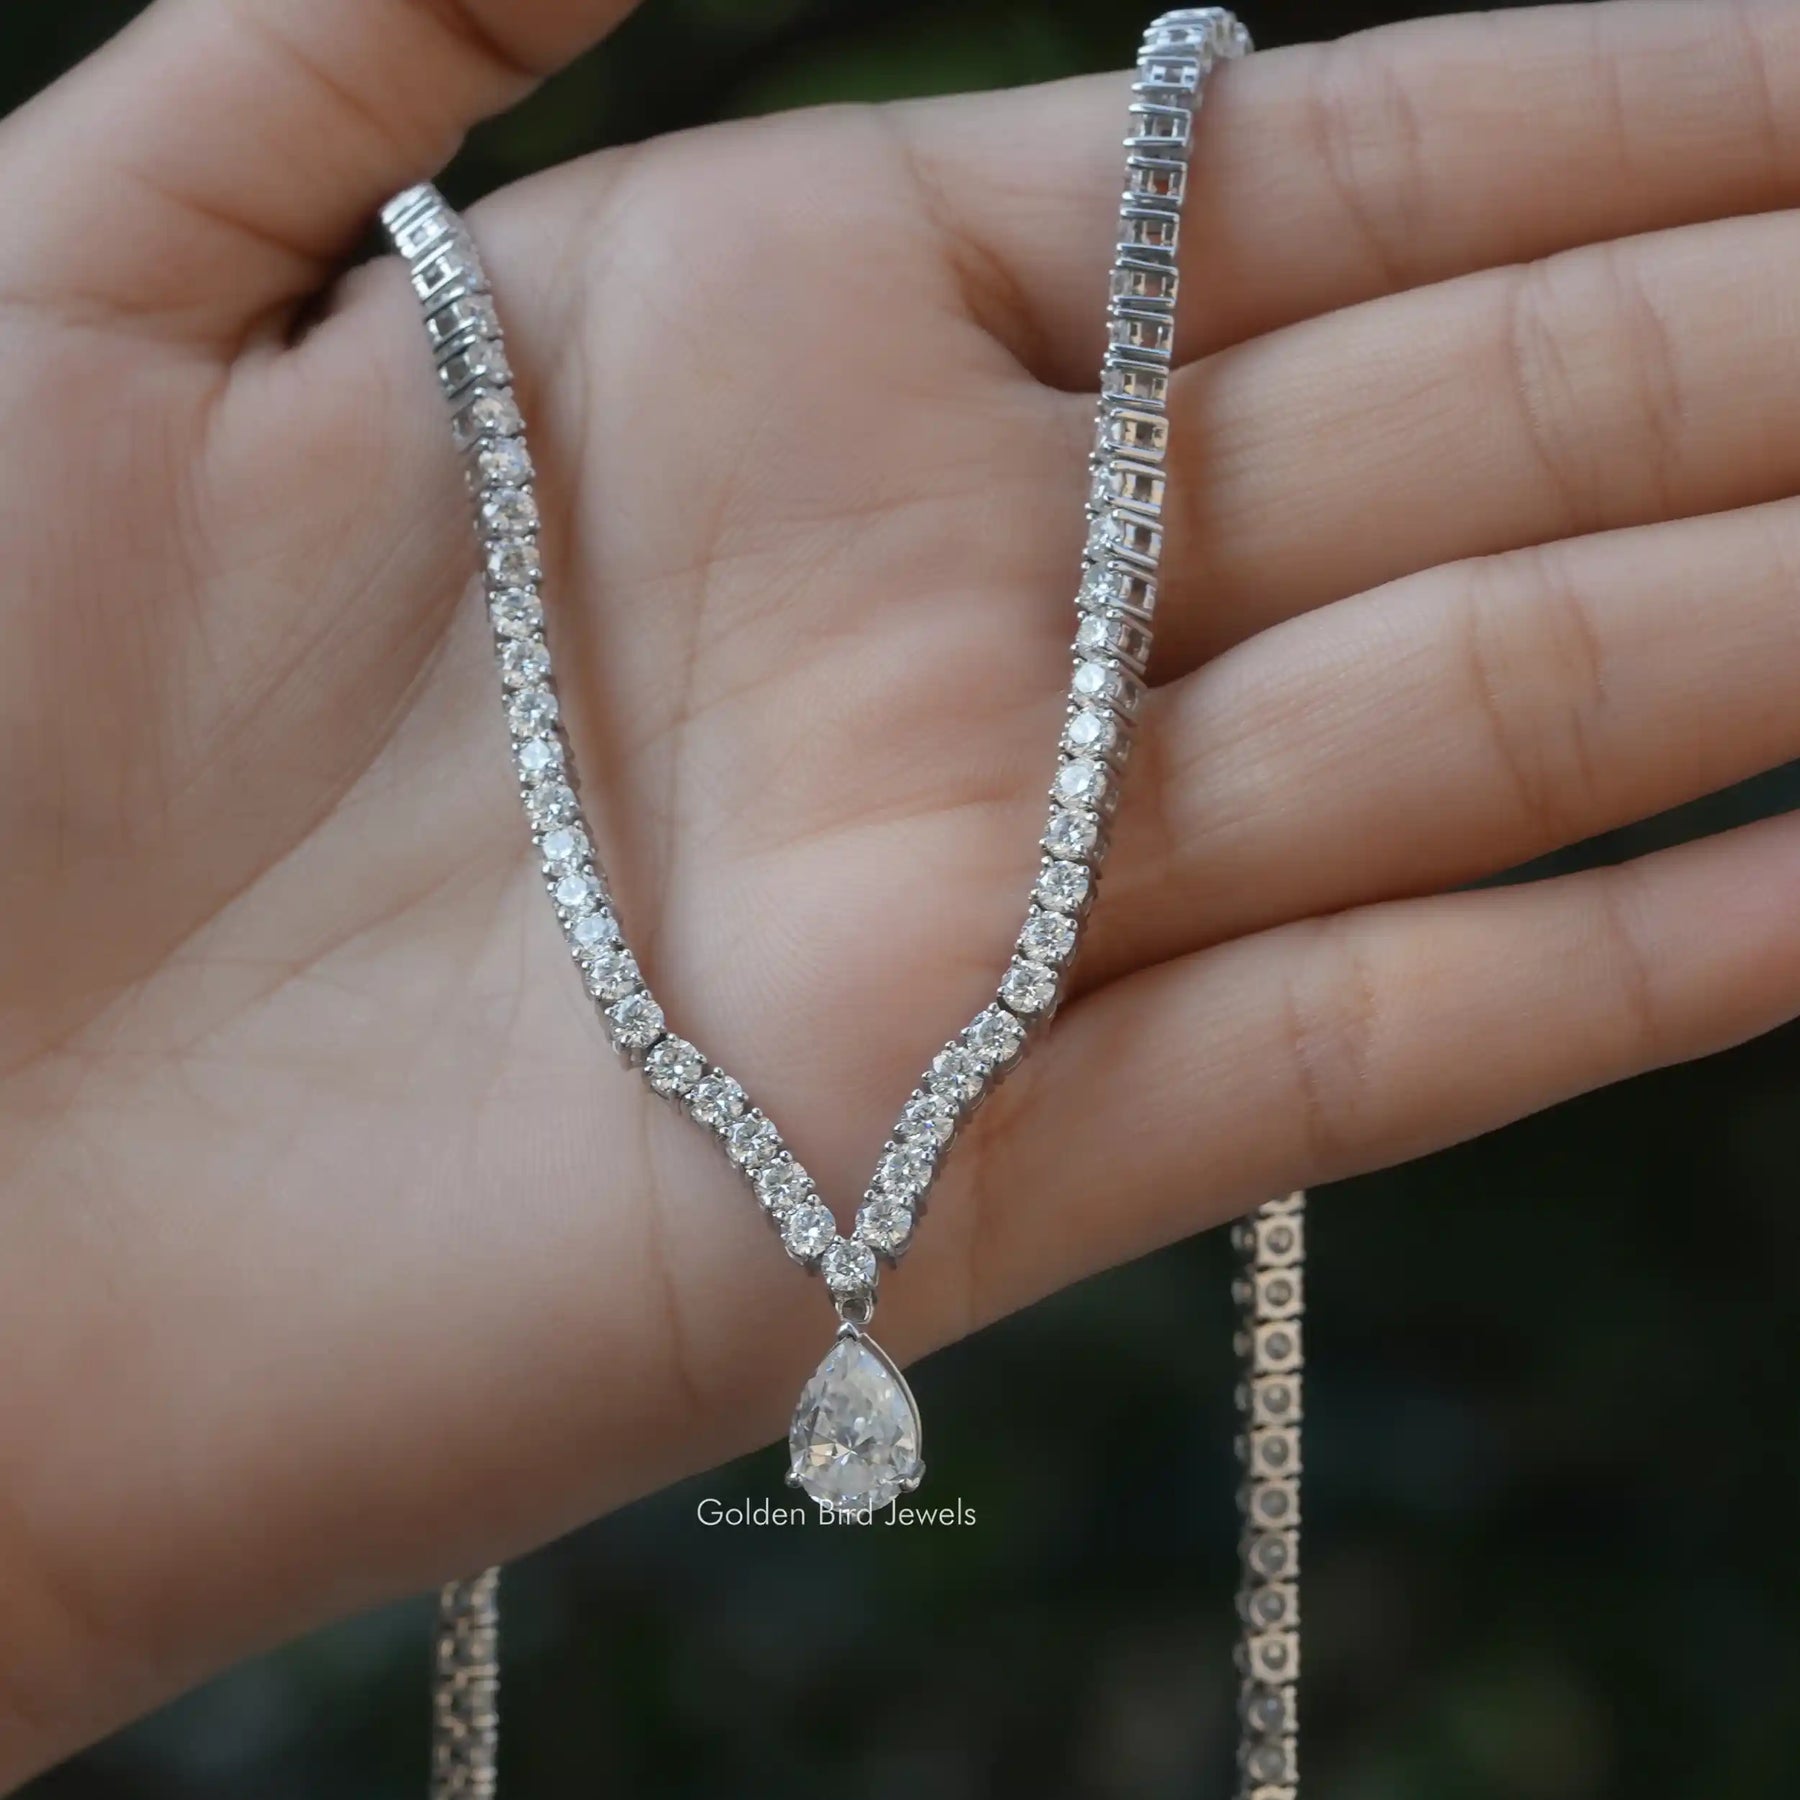 [This moissanite pear shaped tennis necklace made of 14k white gold]-[Golden Bird Jewels]